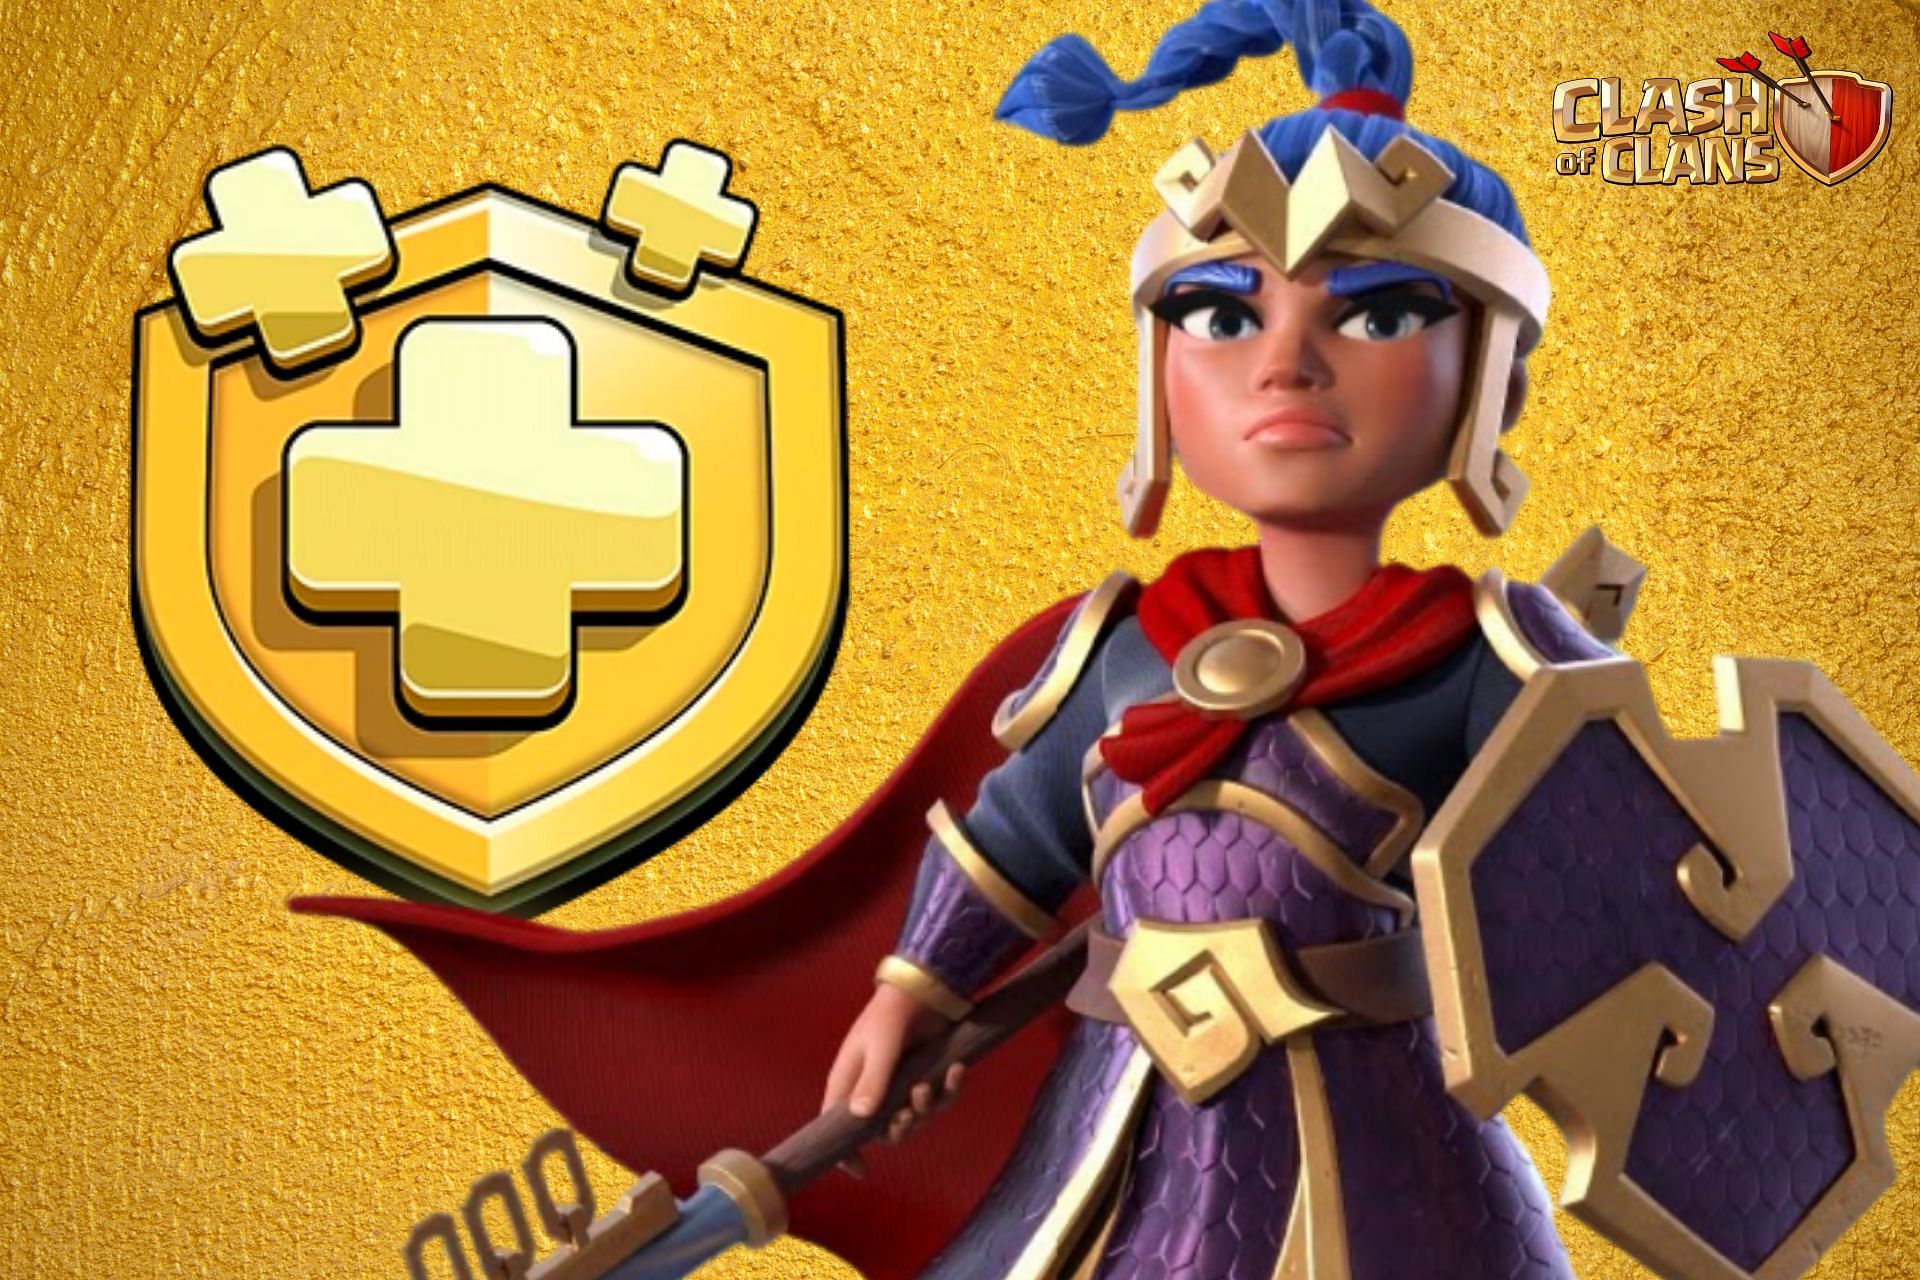 January's Gold Pass in Clash of Clans Information, rewards, and more